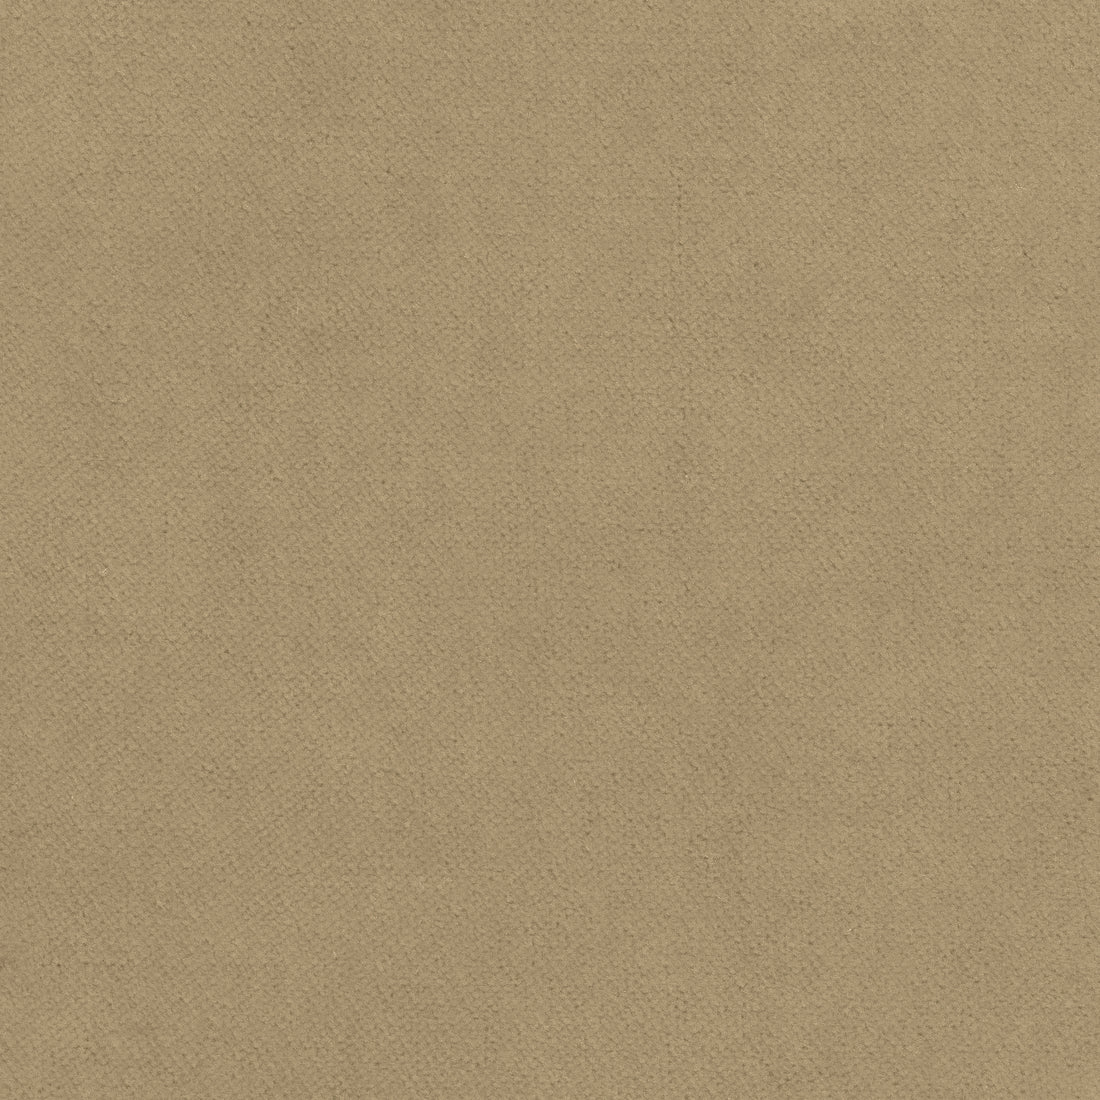 Club Velvet fabric in flax color - pattern number W7224 - by Thibaut in the Club Velvet collection